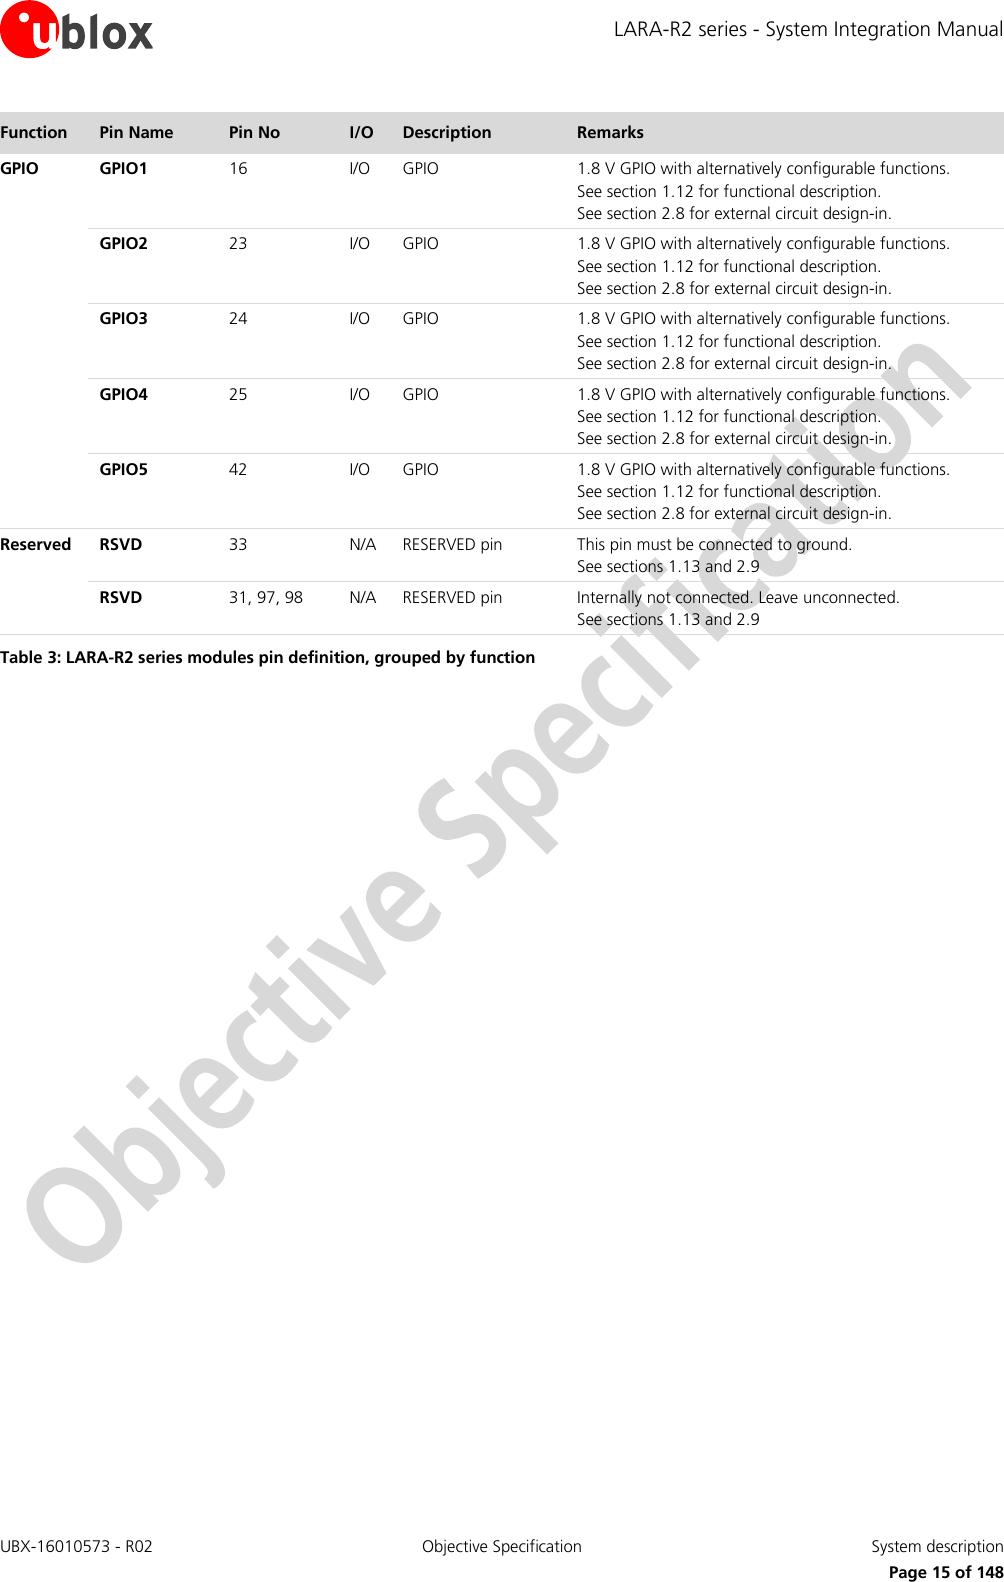 LARA-R2 series - System Integration Manual UBX-16010573 - R02  Objective Specification  System description     Page 15 of 148 Function Pin Name Pin No I/O Description Remarks GPIO GPIO1 16 I/O GPIO 1.8 V GPIO with alternatively configurable functions. See section 1.12 for functional description. See section 2.8 for external circuit design-in.  GPIO2 23 I/O GPIO 1.8 V GPIO with alternatively configurable functions. See section 1.12 for functional description. See section 2.8 for external circuit design-in.  GPIO3 24 I/O GPIO 1.8 V GPIO with alternatively configurable functions. See section 1.12 for functional description. See section 2.8 for external circuit design-in.  GPIO4 25 I/O GPIO 1.8 V GPIO with alternatively configurable functions. See section 1.12 for functional description. See section 2.8 for external circuit design-in.  GPIO5 42 I/O GPIO 1.8 V GPIO with alternatively configurable functions. See section 1.12 for functional description. See section 2.8 for external circuit design-in. Reserved RSVD 33 N/A RESERVED pin This pin must be connected to ground. See sections 1.13 and 2.9  RSVD 31, 97, 98 N/A RESERVED pin Internally not connected. Leave unconnected. See sections 1.13 and 2.9 Table 3: LARA-R2 series modules pin definition, grouped by function  